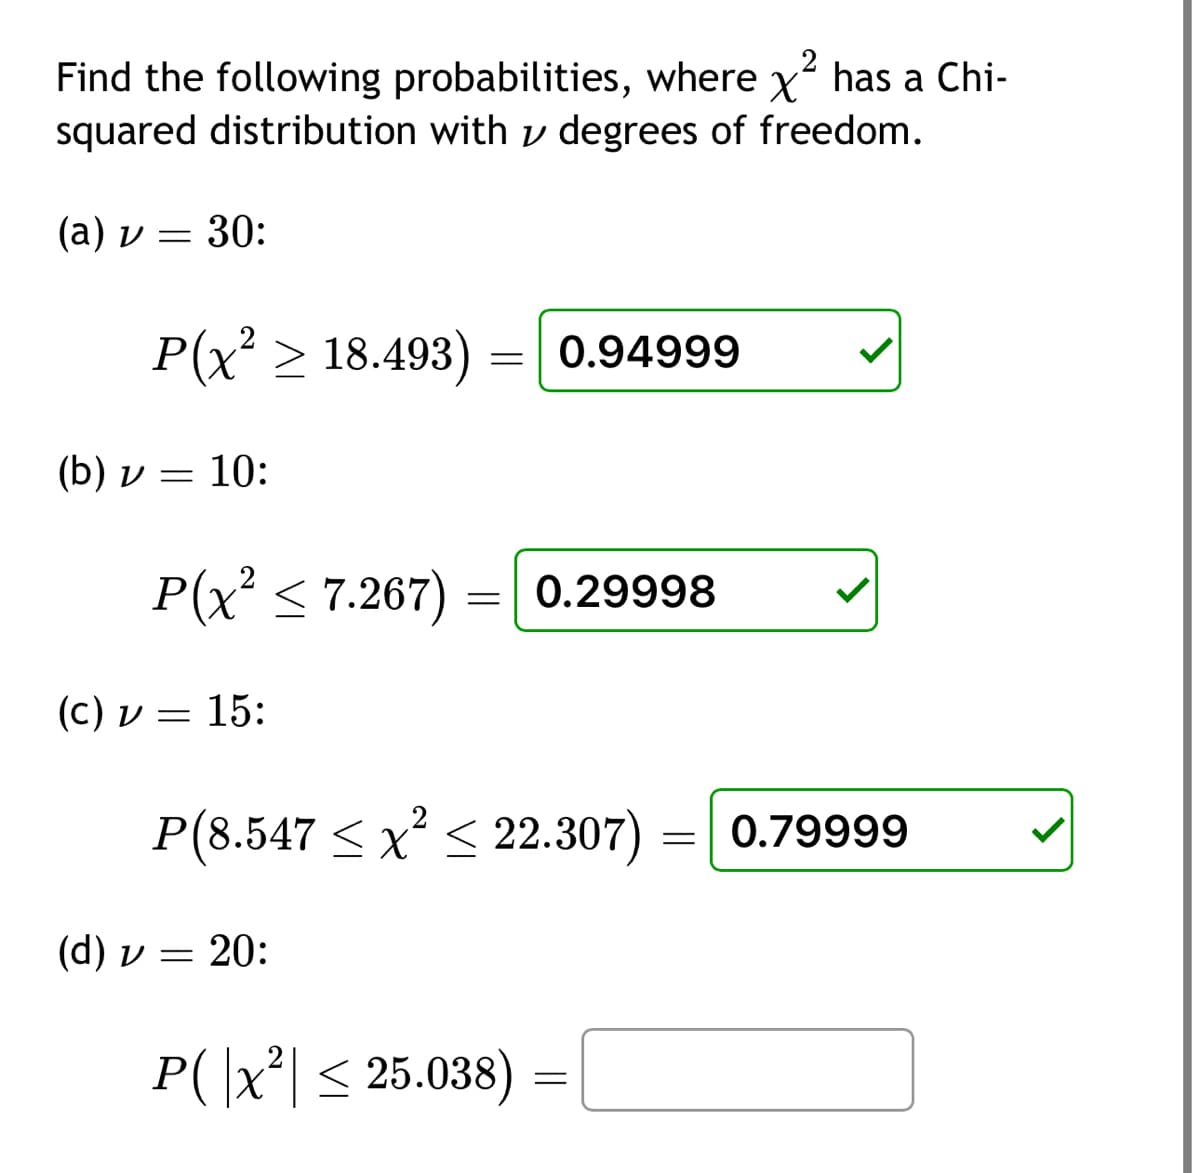 2
Find the following probabilities, where x has a Chi-
squared distribution with degrees of freedom.
(a) v = 30:
P(x² > 18.493) 0.94999
(b) v = 10:
(d) v
(c) v = 15:
P(x² ≤7.267) 0.29998
=
=
P(8.547 ≤ x² ≤ 22.307) 0.79999
20:
=
P(|x²| ≤ 25.038)
=
=